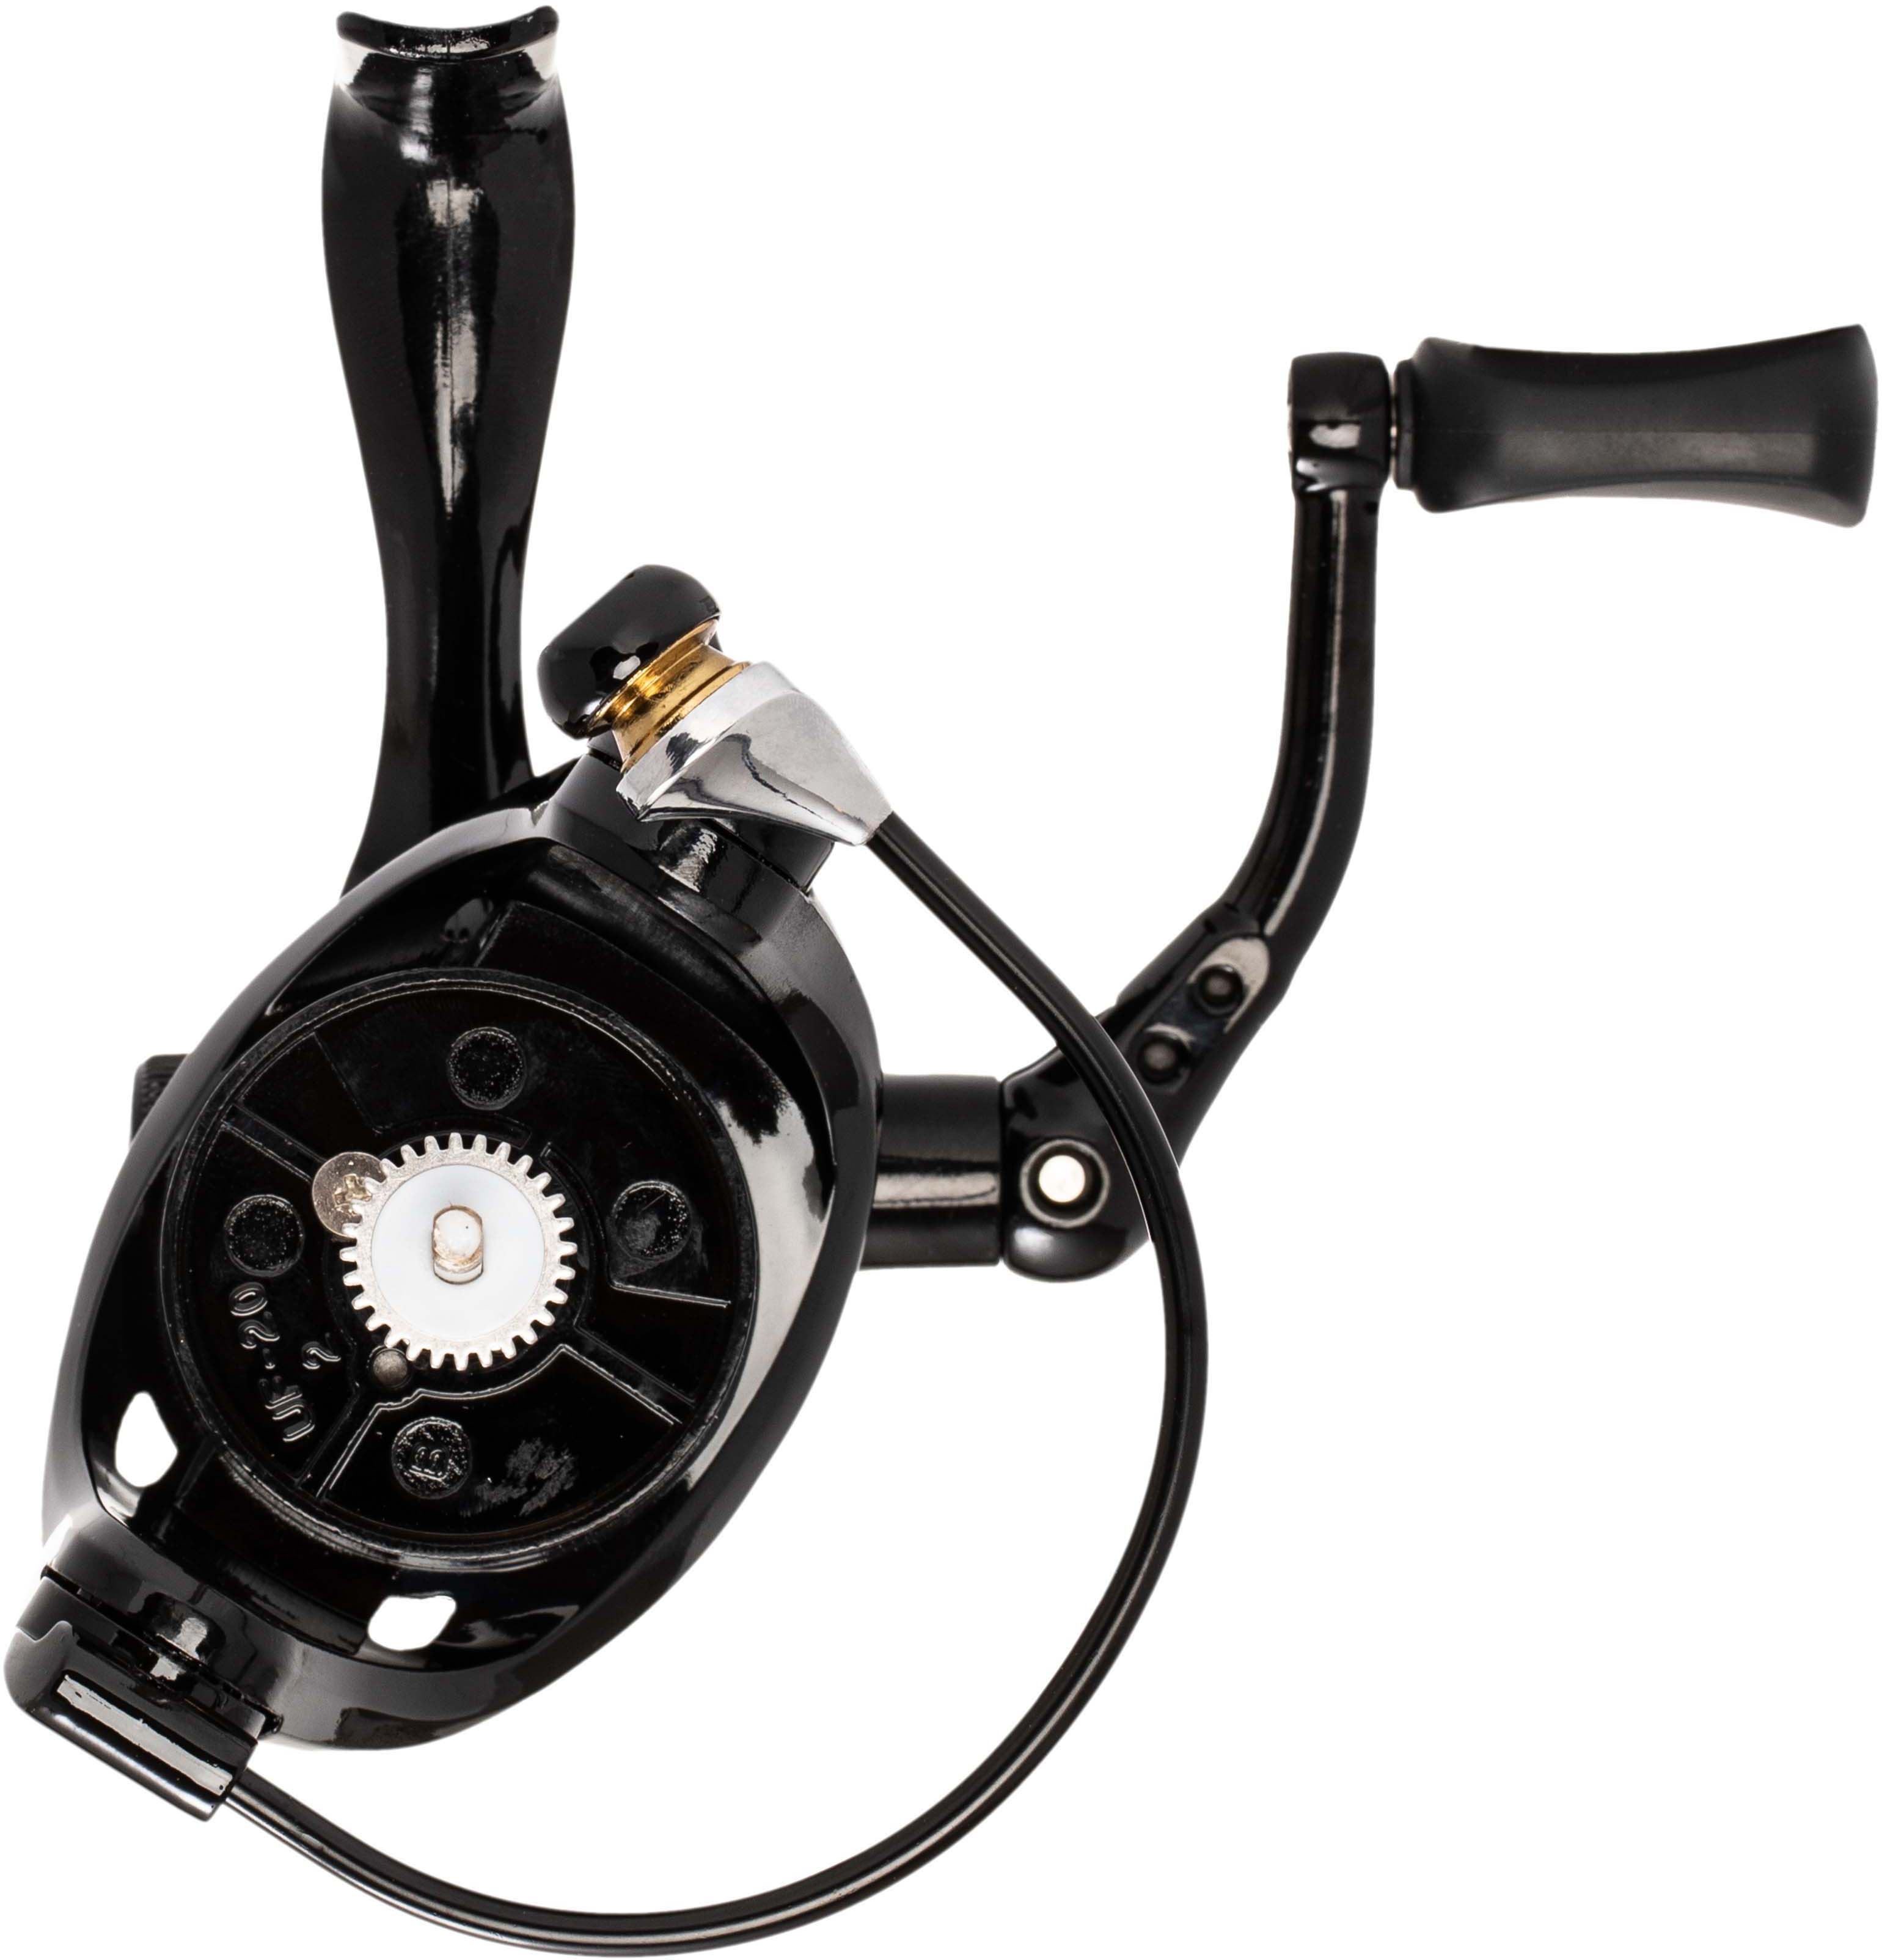 https://op2.0ps.us/original/opplanet-ardent-finesse-spinning-reel-1000-size-5-1-1-7-1-vc10bb-main